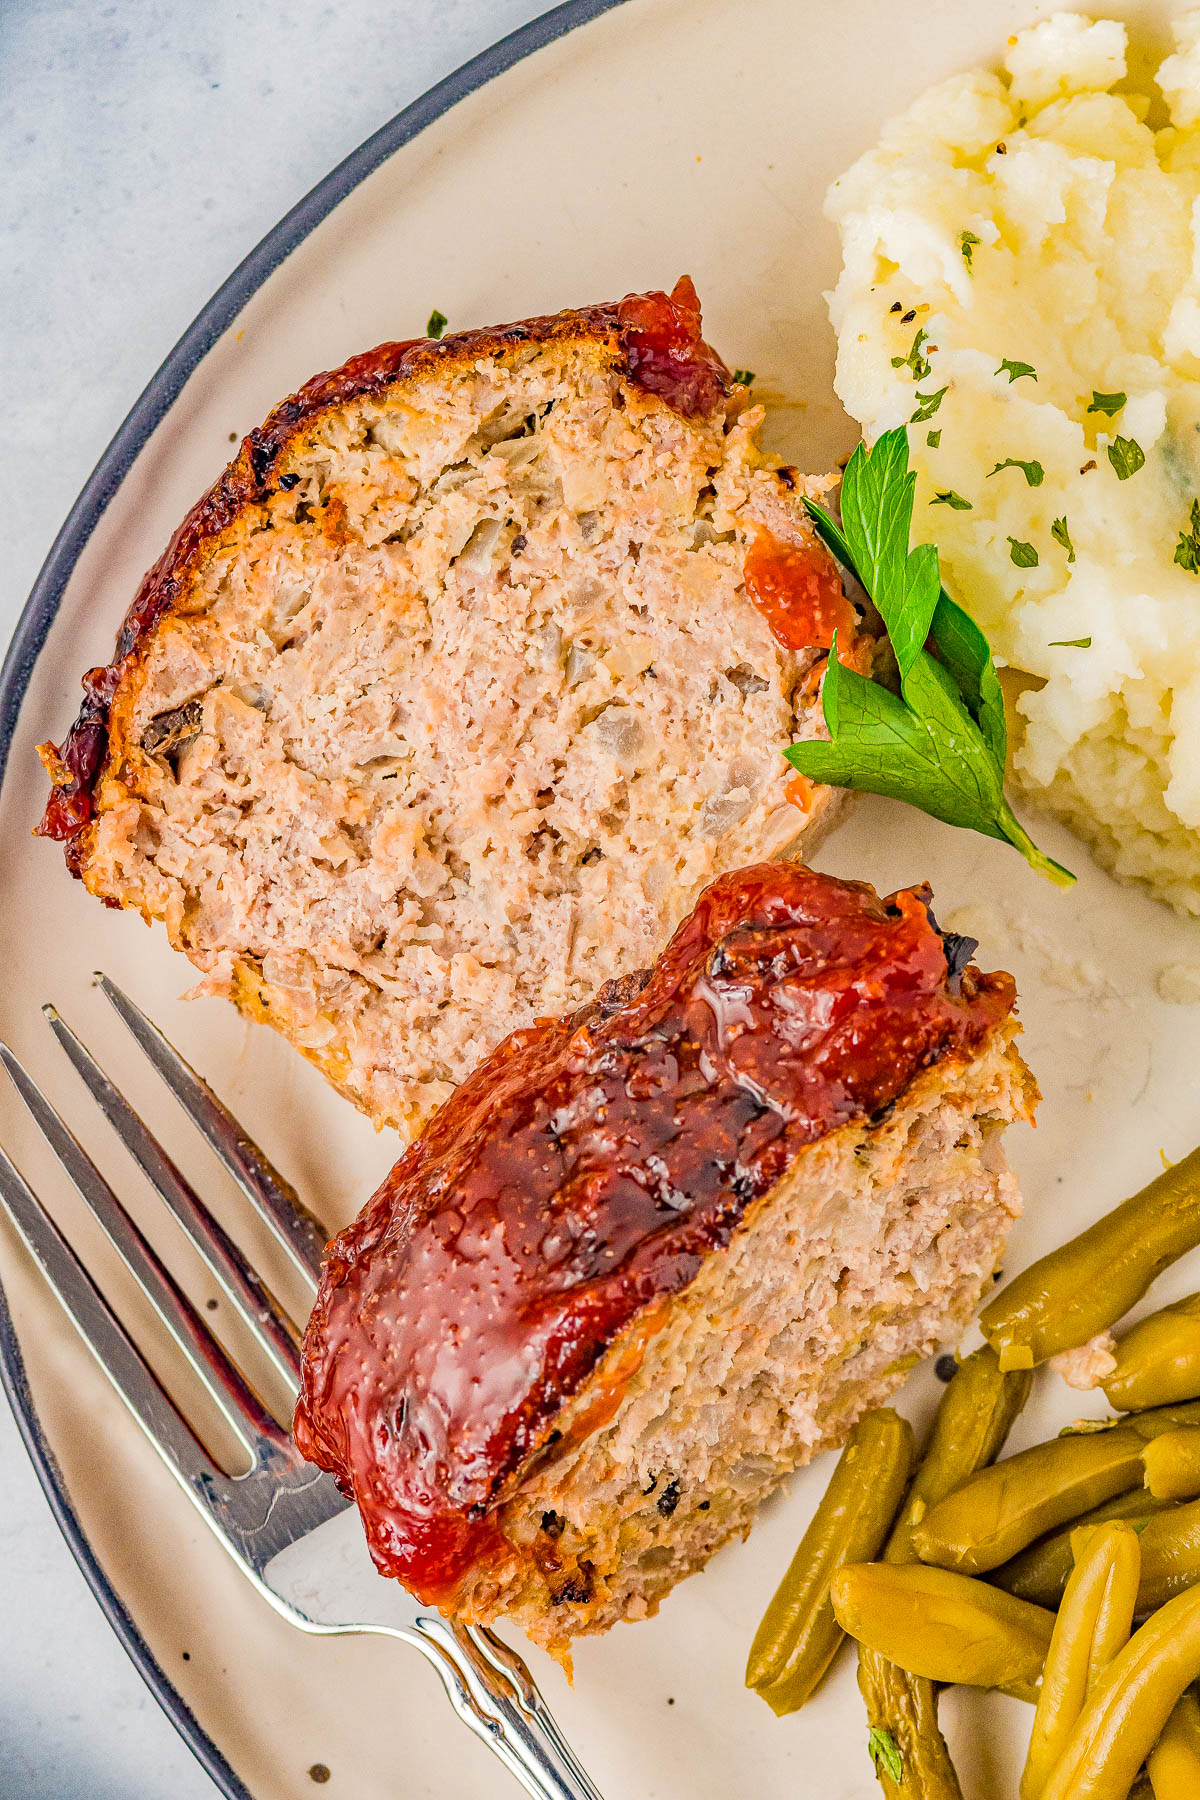 Air Fryer Meatloaf - Learn how to make AMAZING meatloaf in your air fryer! It cooks in half the time that it does in the oven, has perfectly crisped edges, and the interior stays juicy and moist! I use ground turkey or ground chicken to keep it HEALTHIER but ground pork, ground sausage, or ground beef can be used! Oven baking instructions also provided.